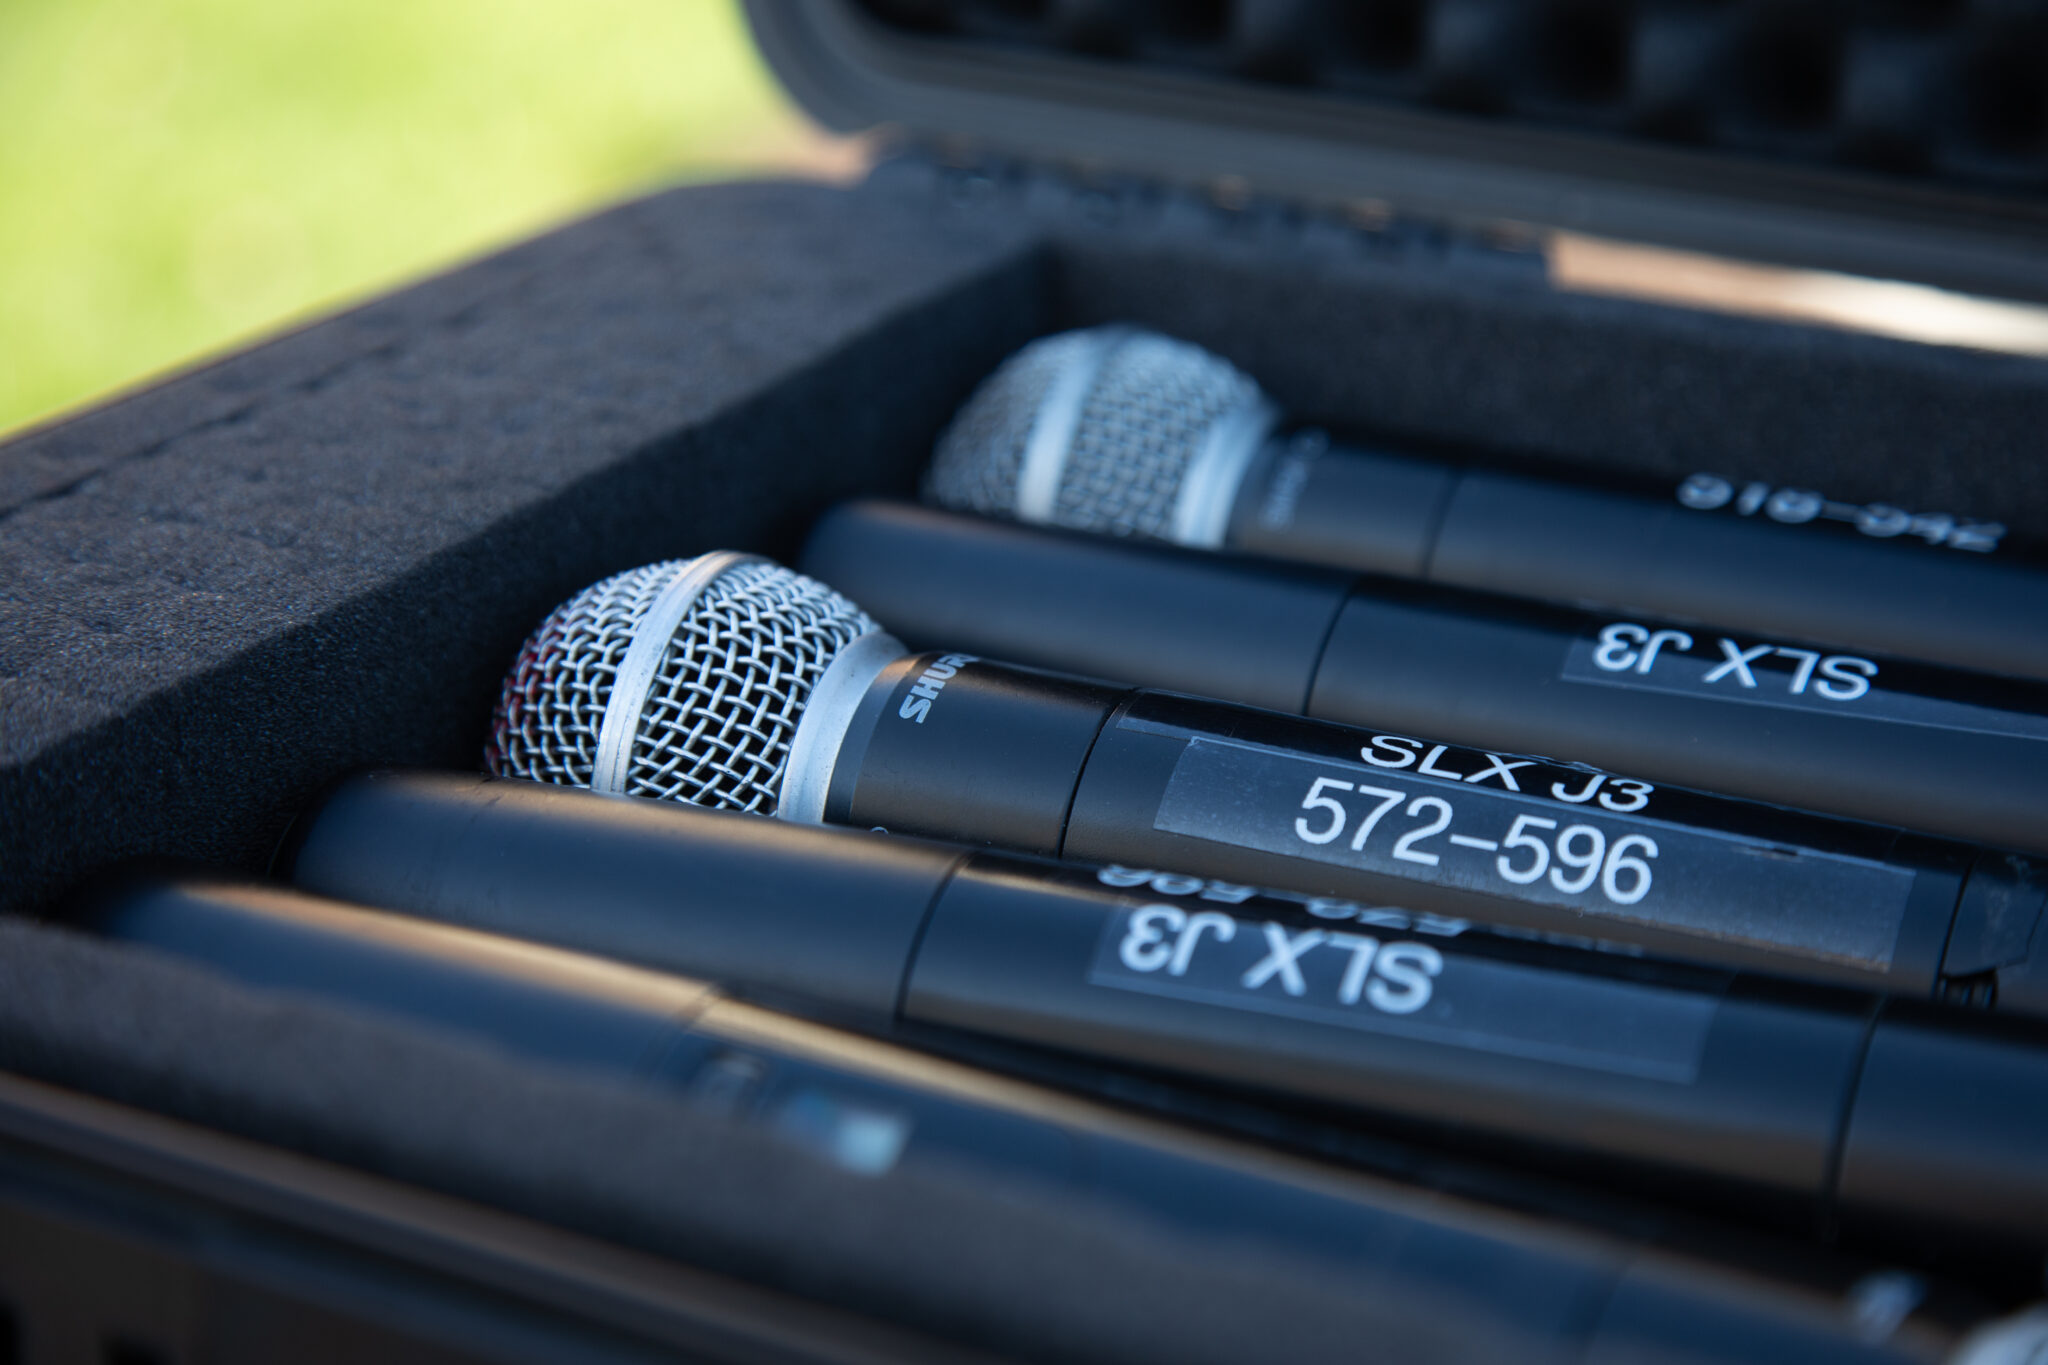 microphones lay in a case